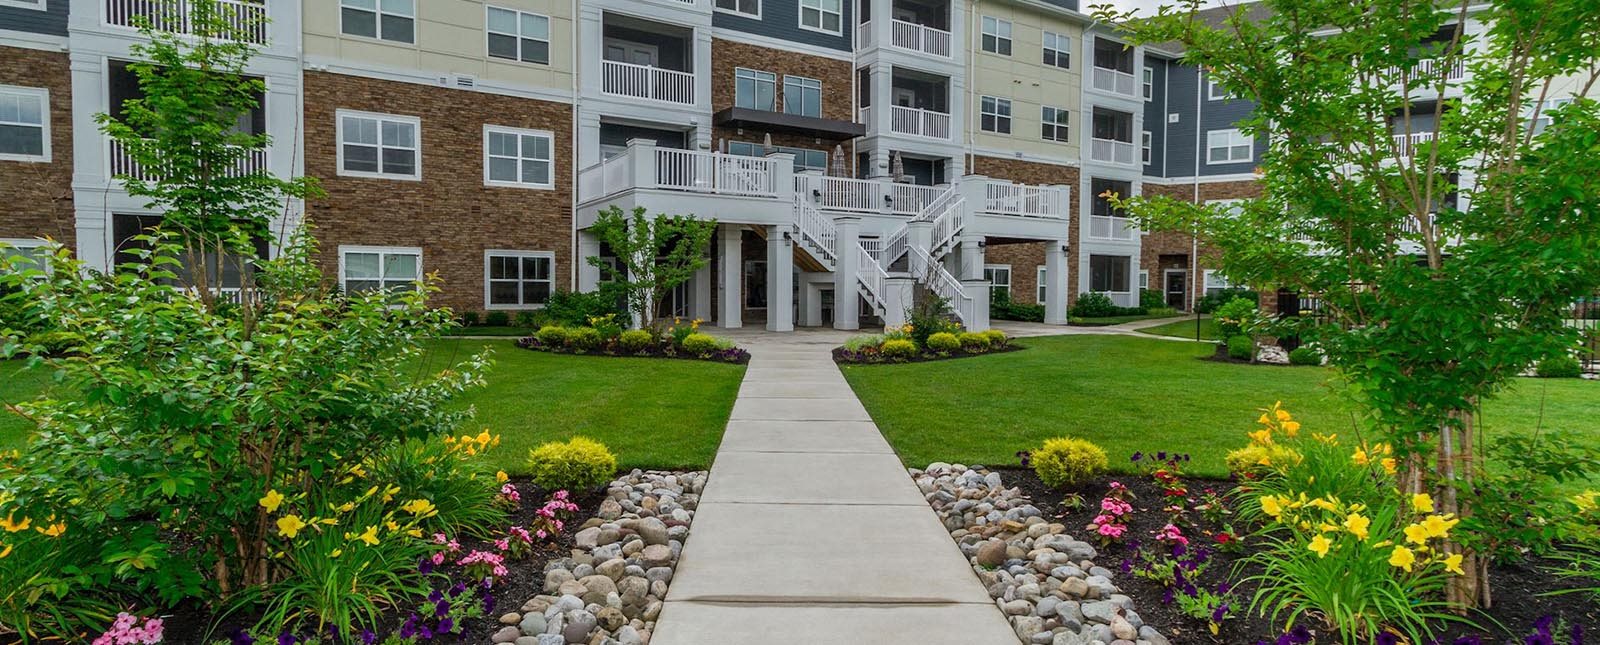 The Haven at Atwater Village Apartments in Malvern, PA